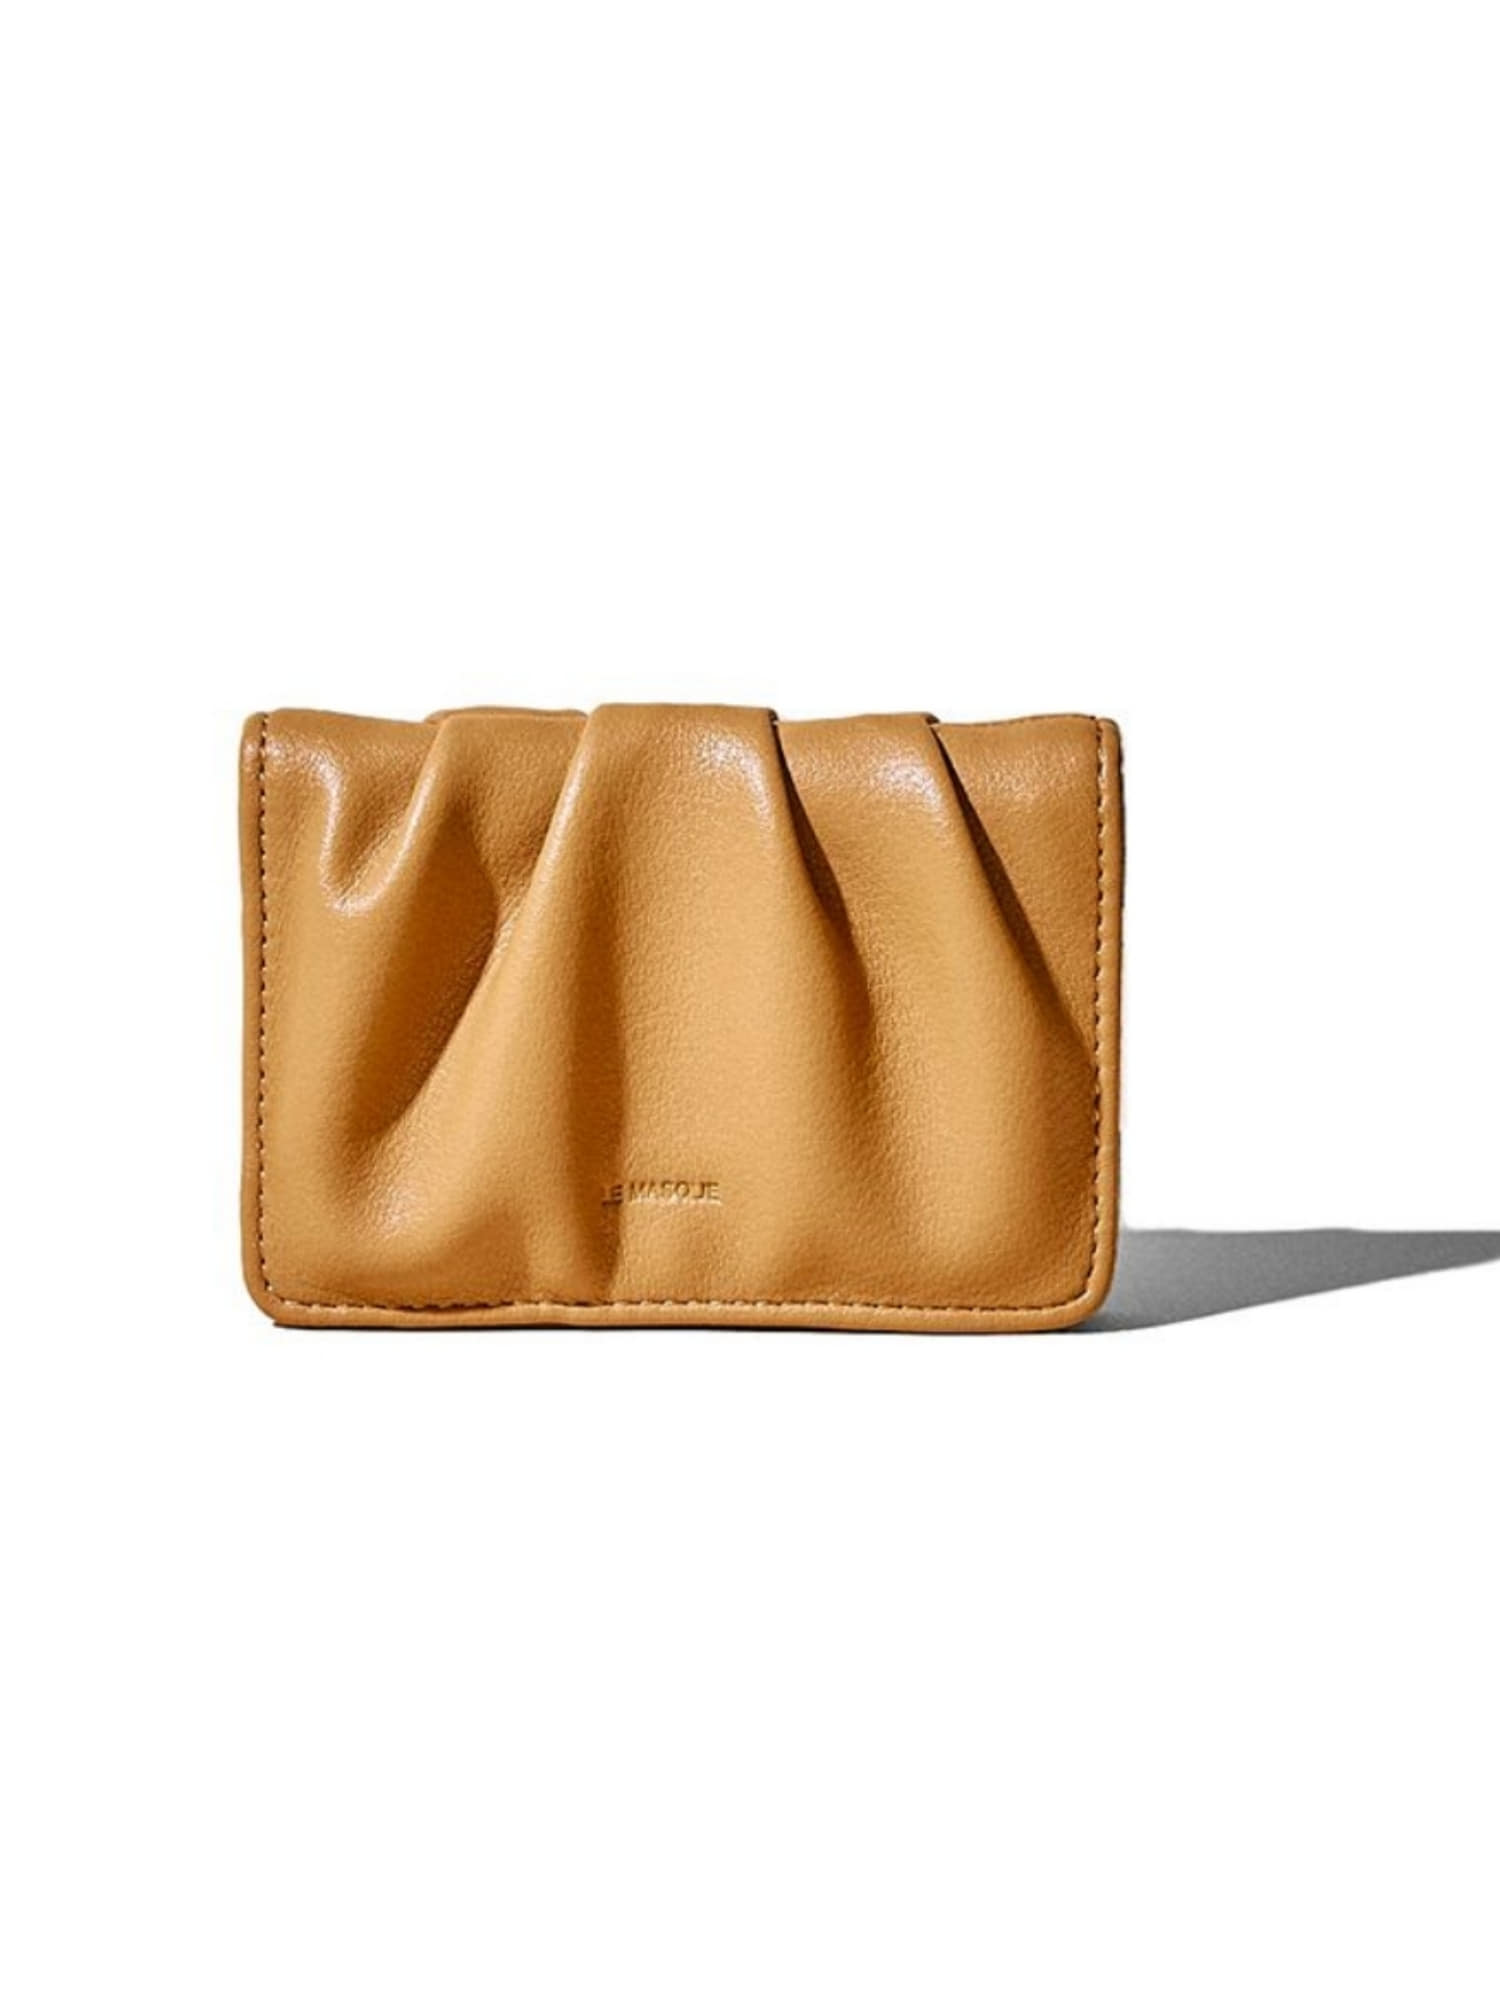 DOUGH Soft Leather Card Case Wallet - Tan Brown